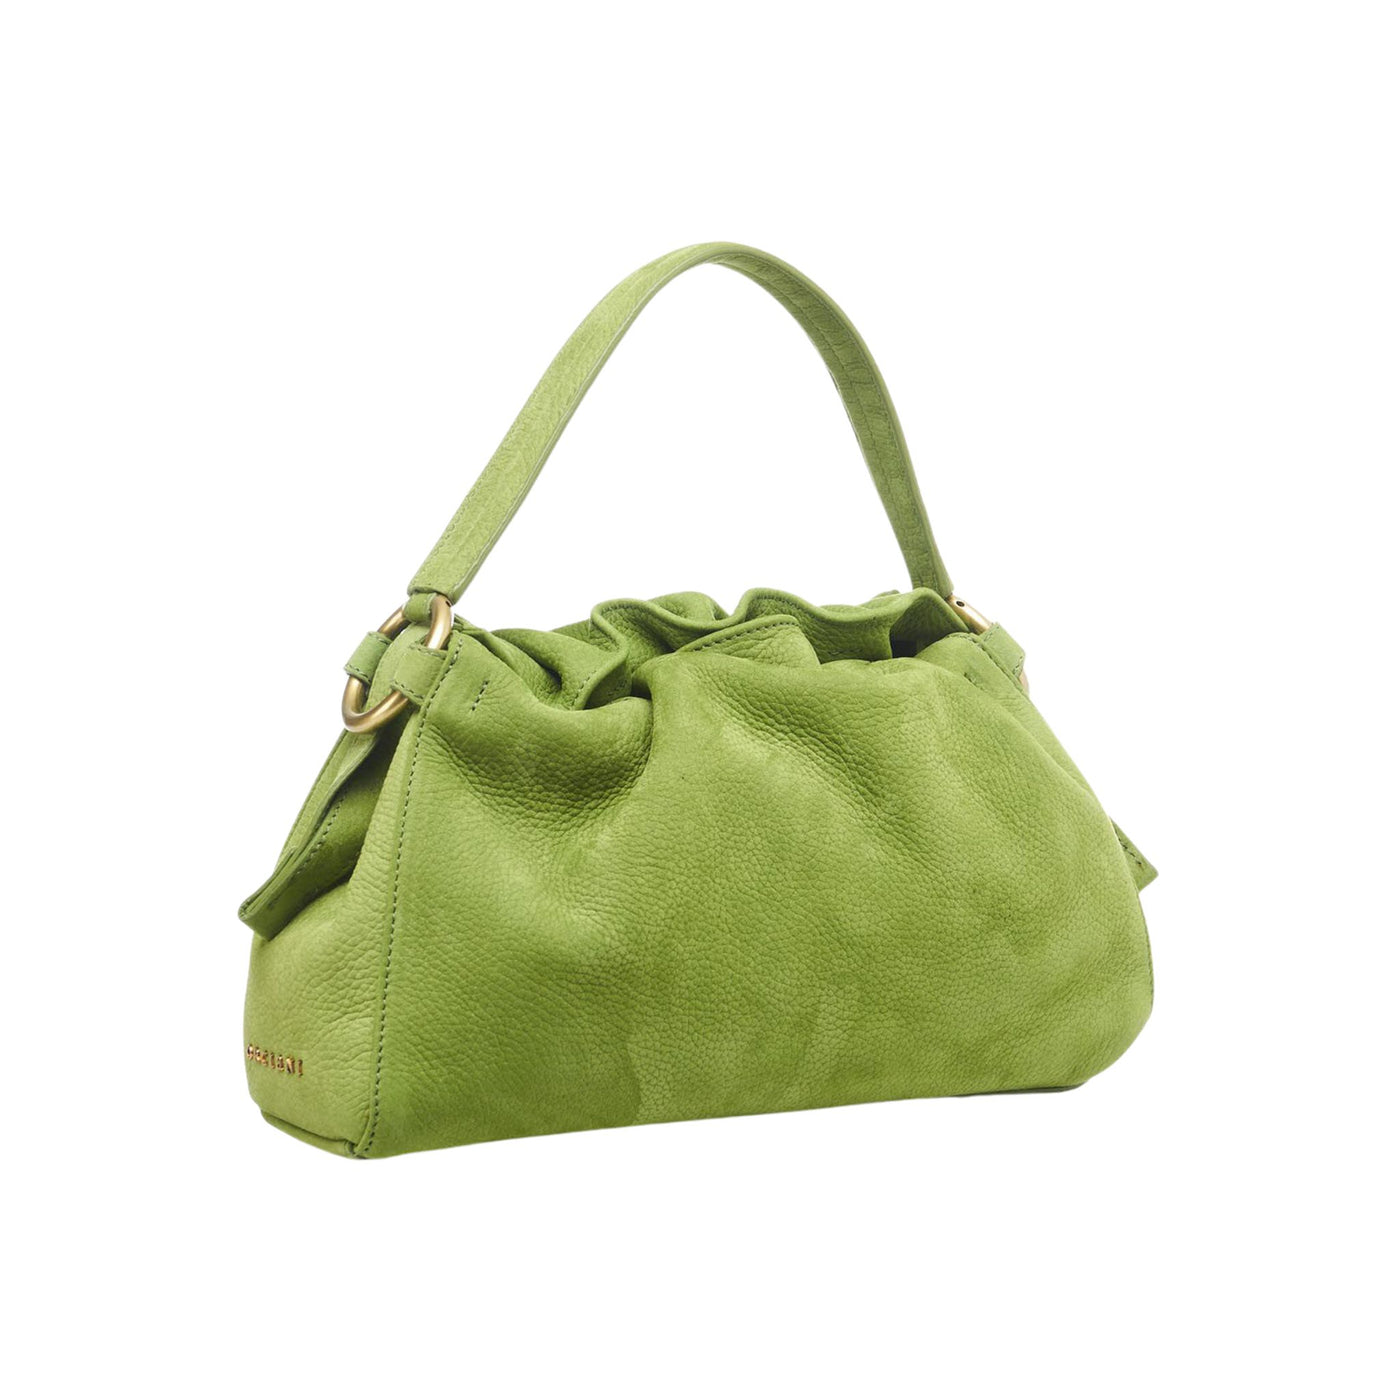 Women's bag in single-color leather